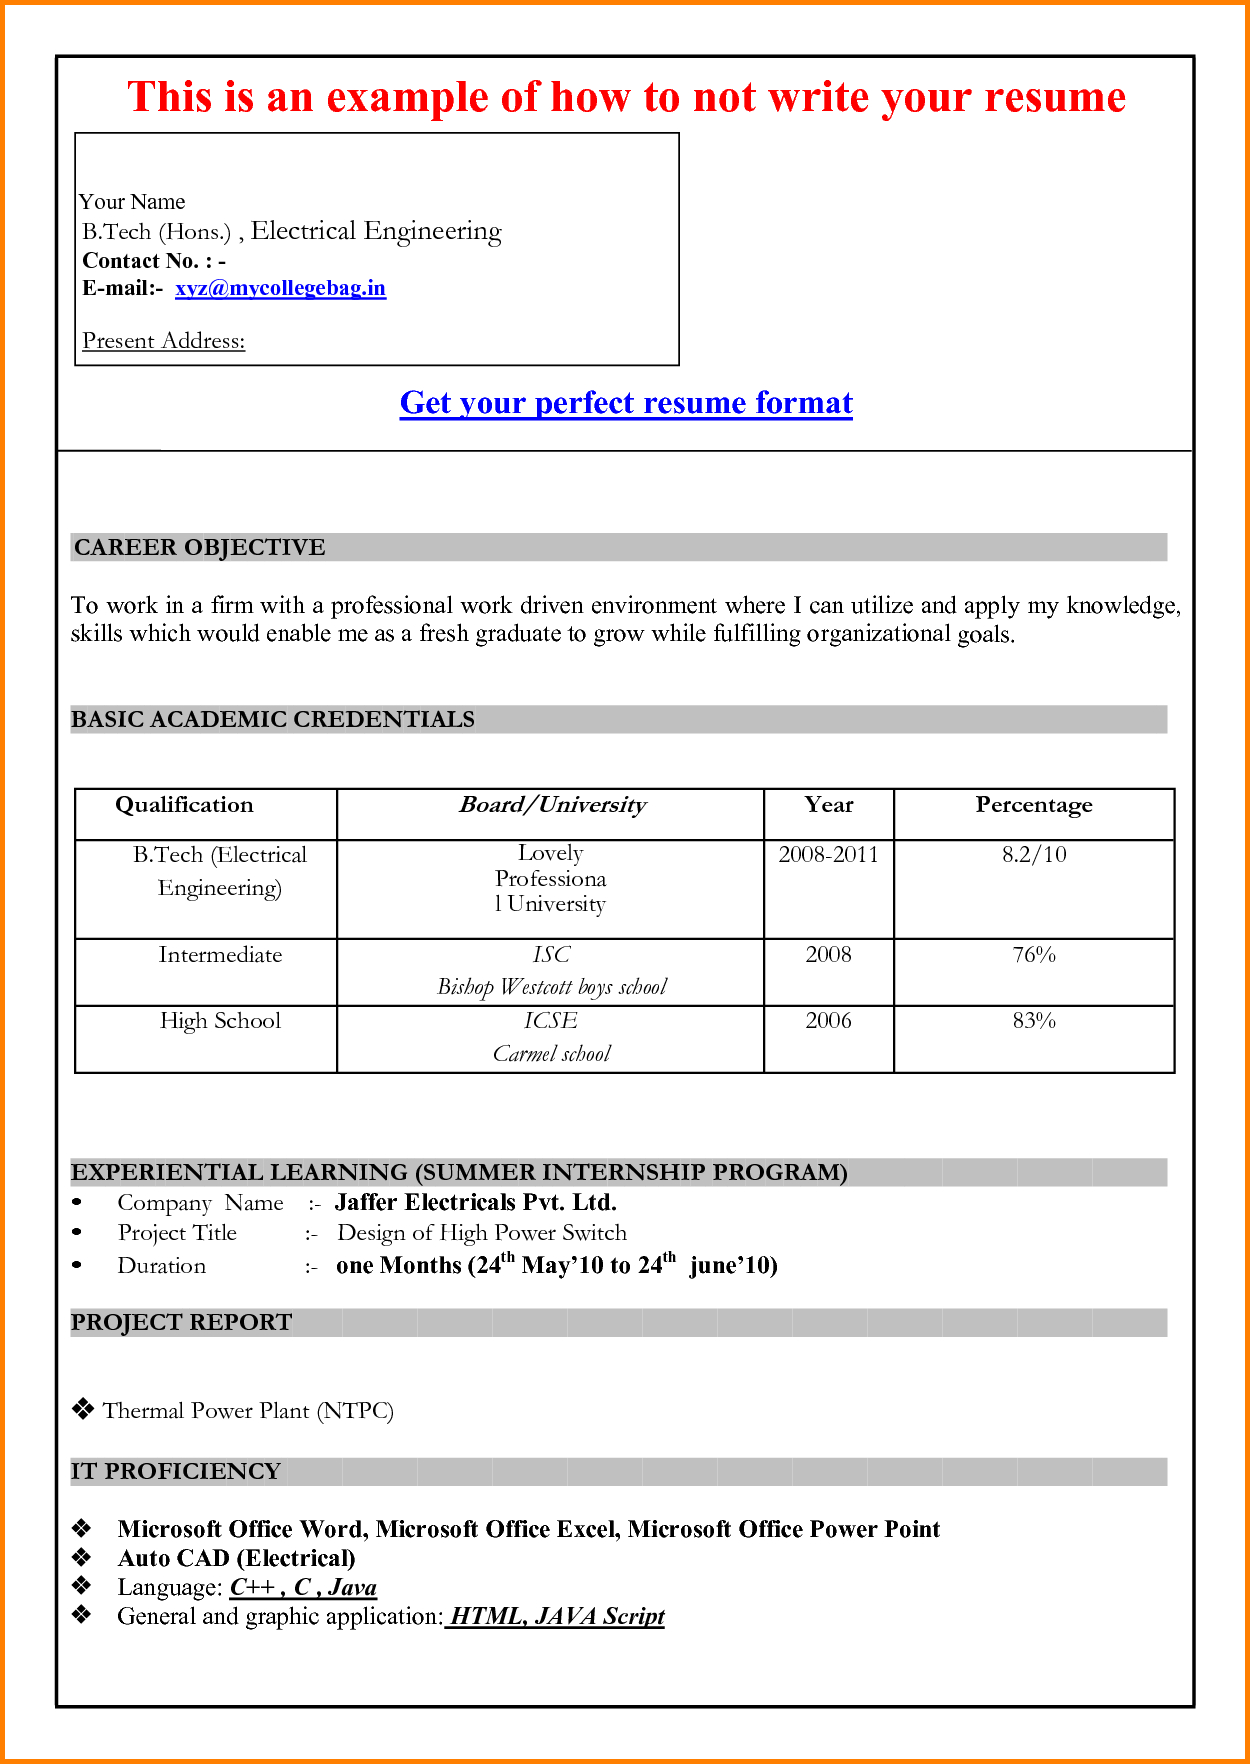 Resume Format In Microsoft Word 2007 – Zohre Throughout Resume Templates Word 2007